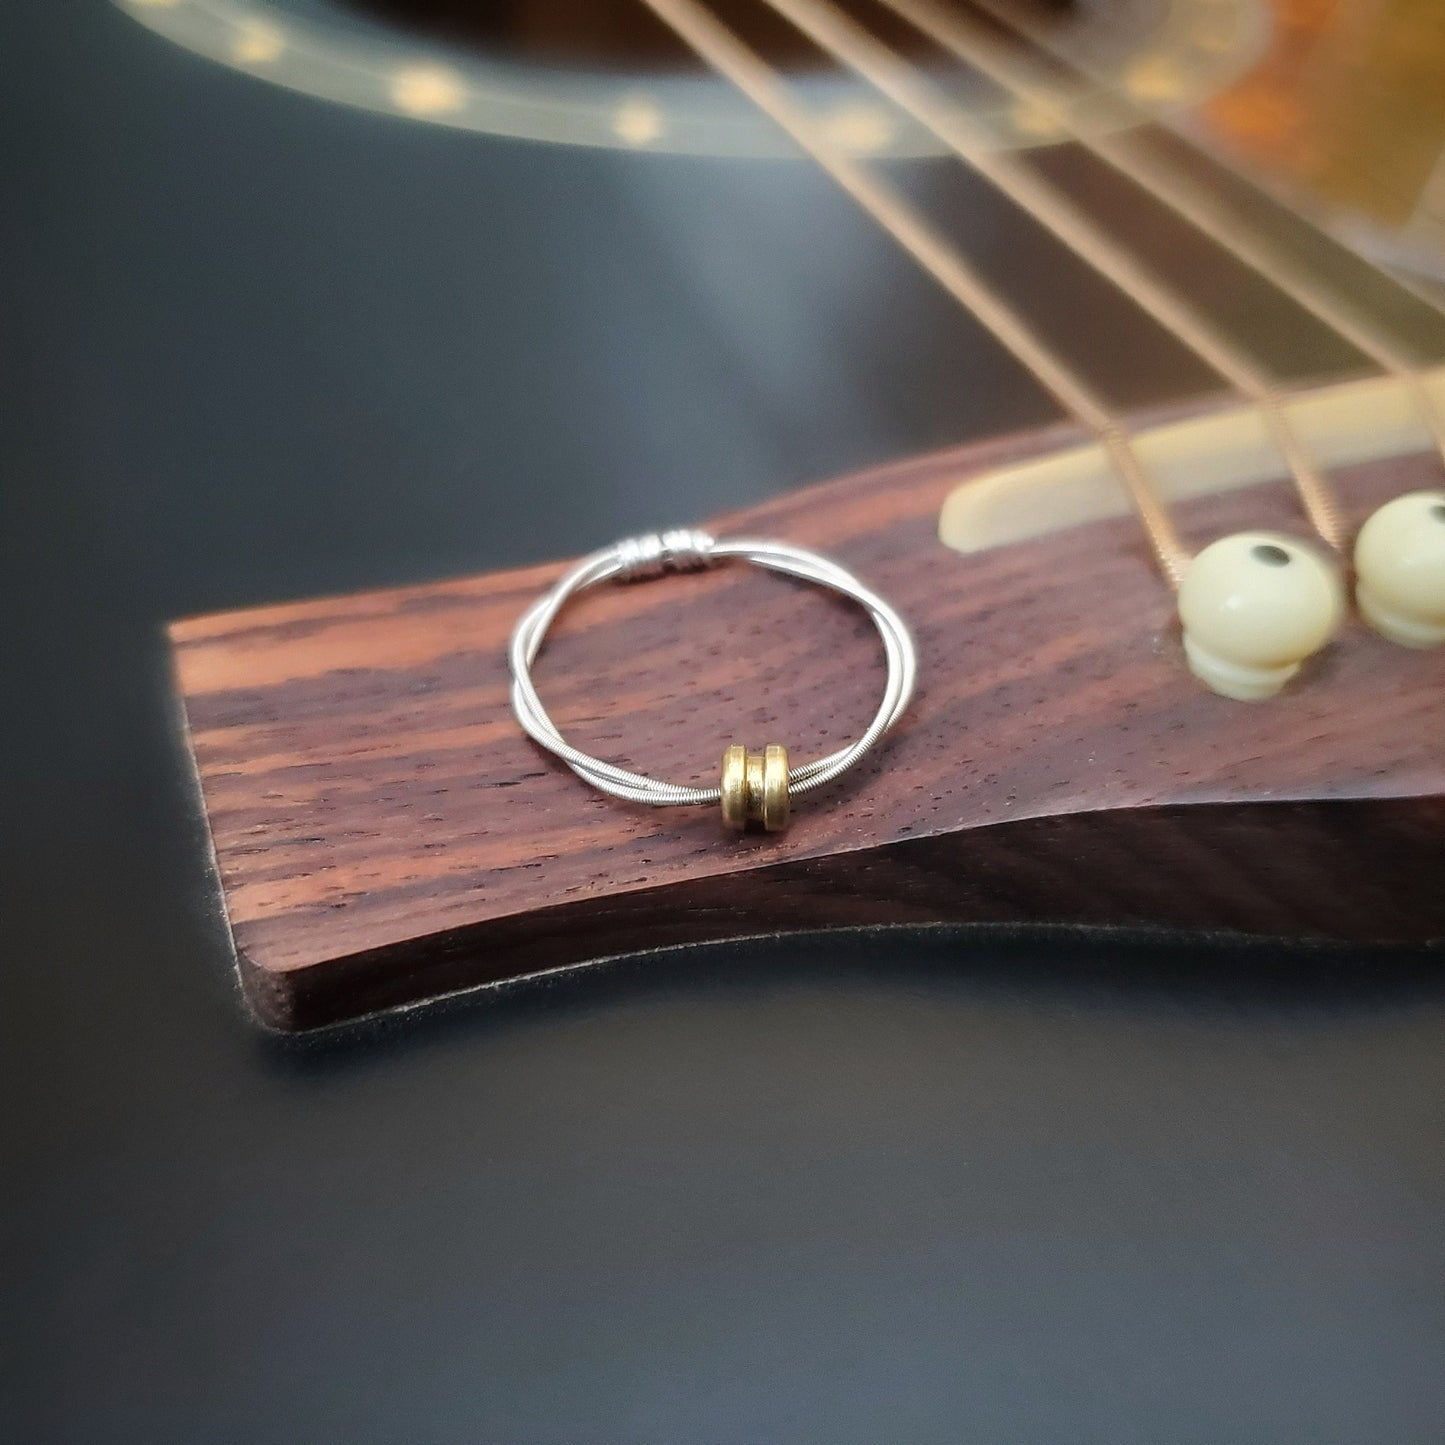 guitar string fidget ring with a gold coloured ballend sitting on the bridge of a black guitar